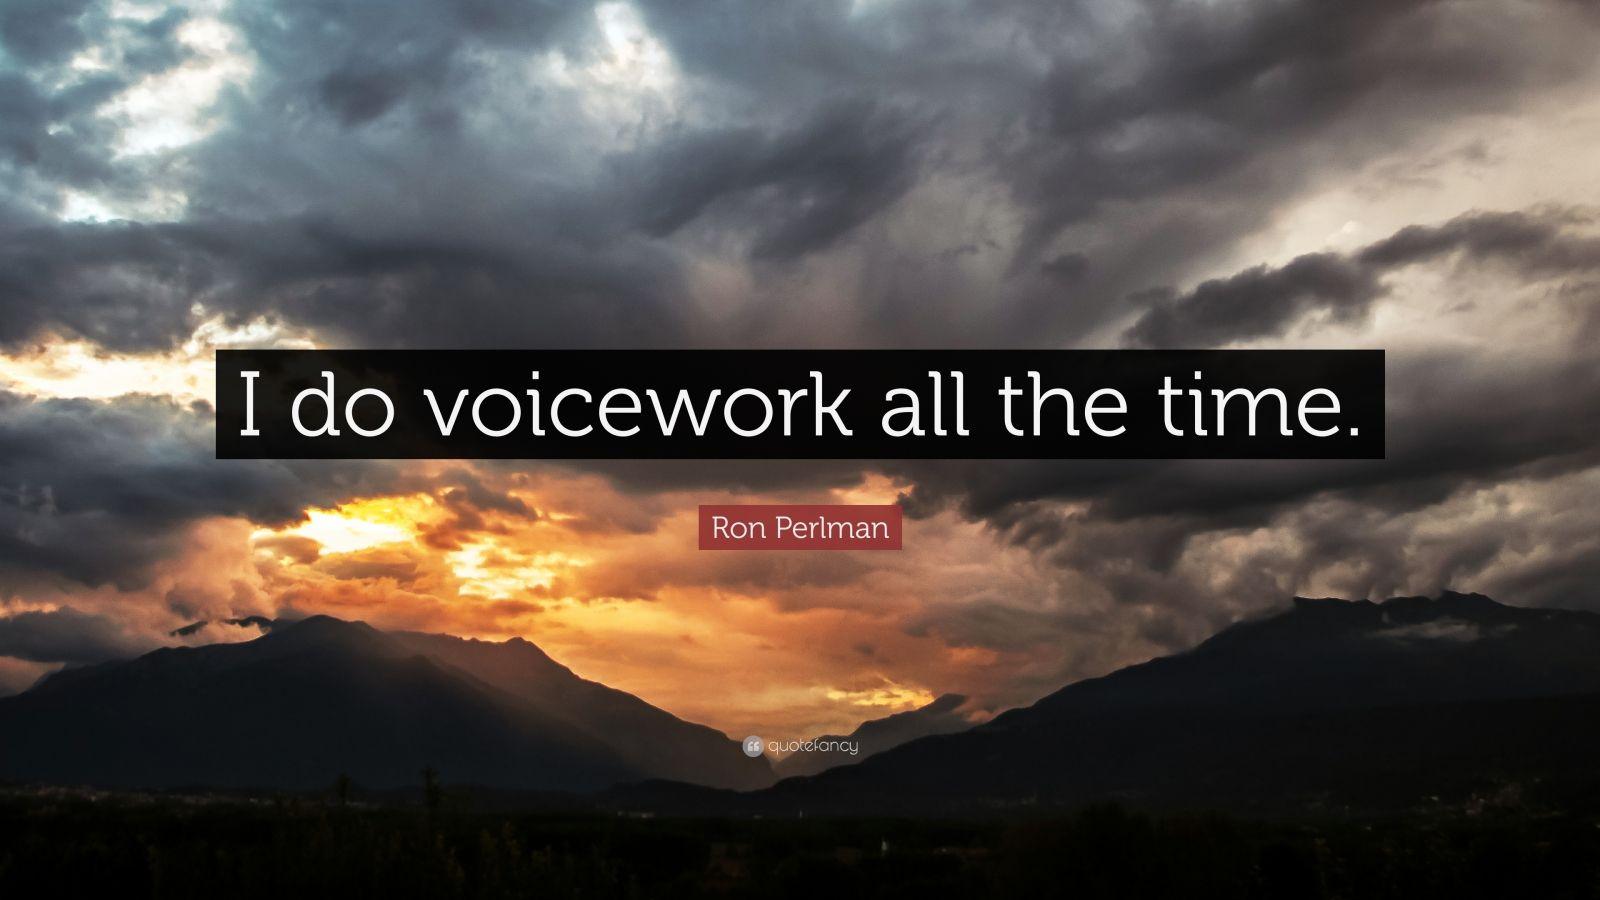 Ron Perlman Quote: “I do voicework all the time.” 7 wallpaper